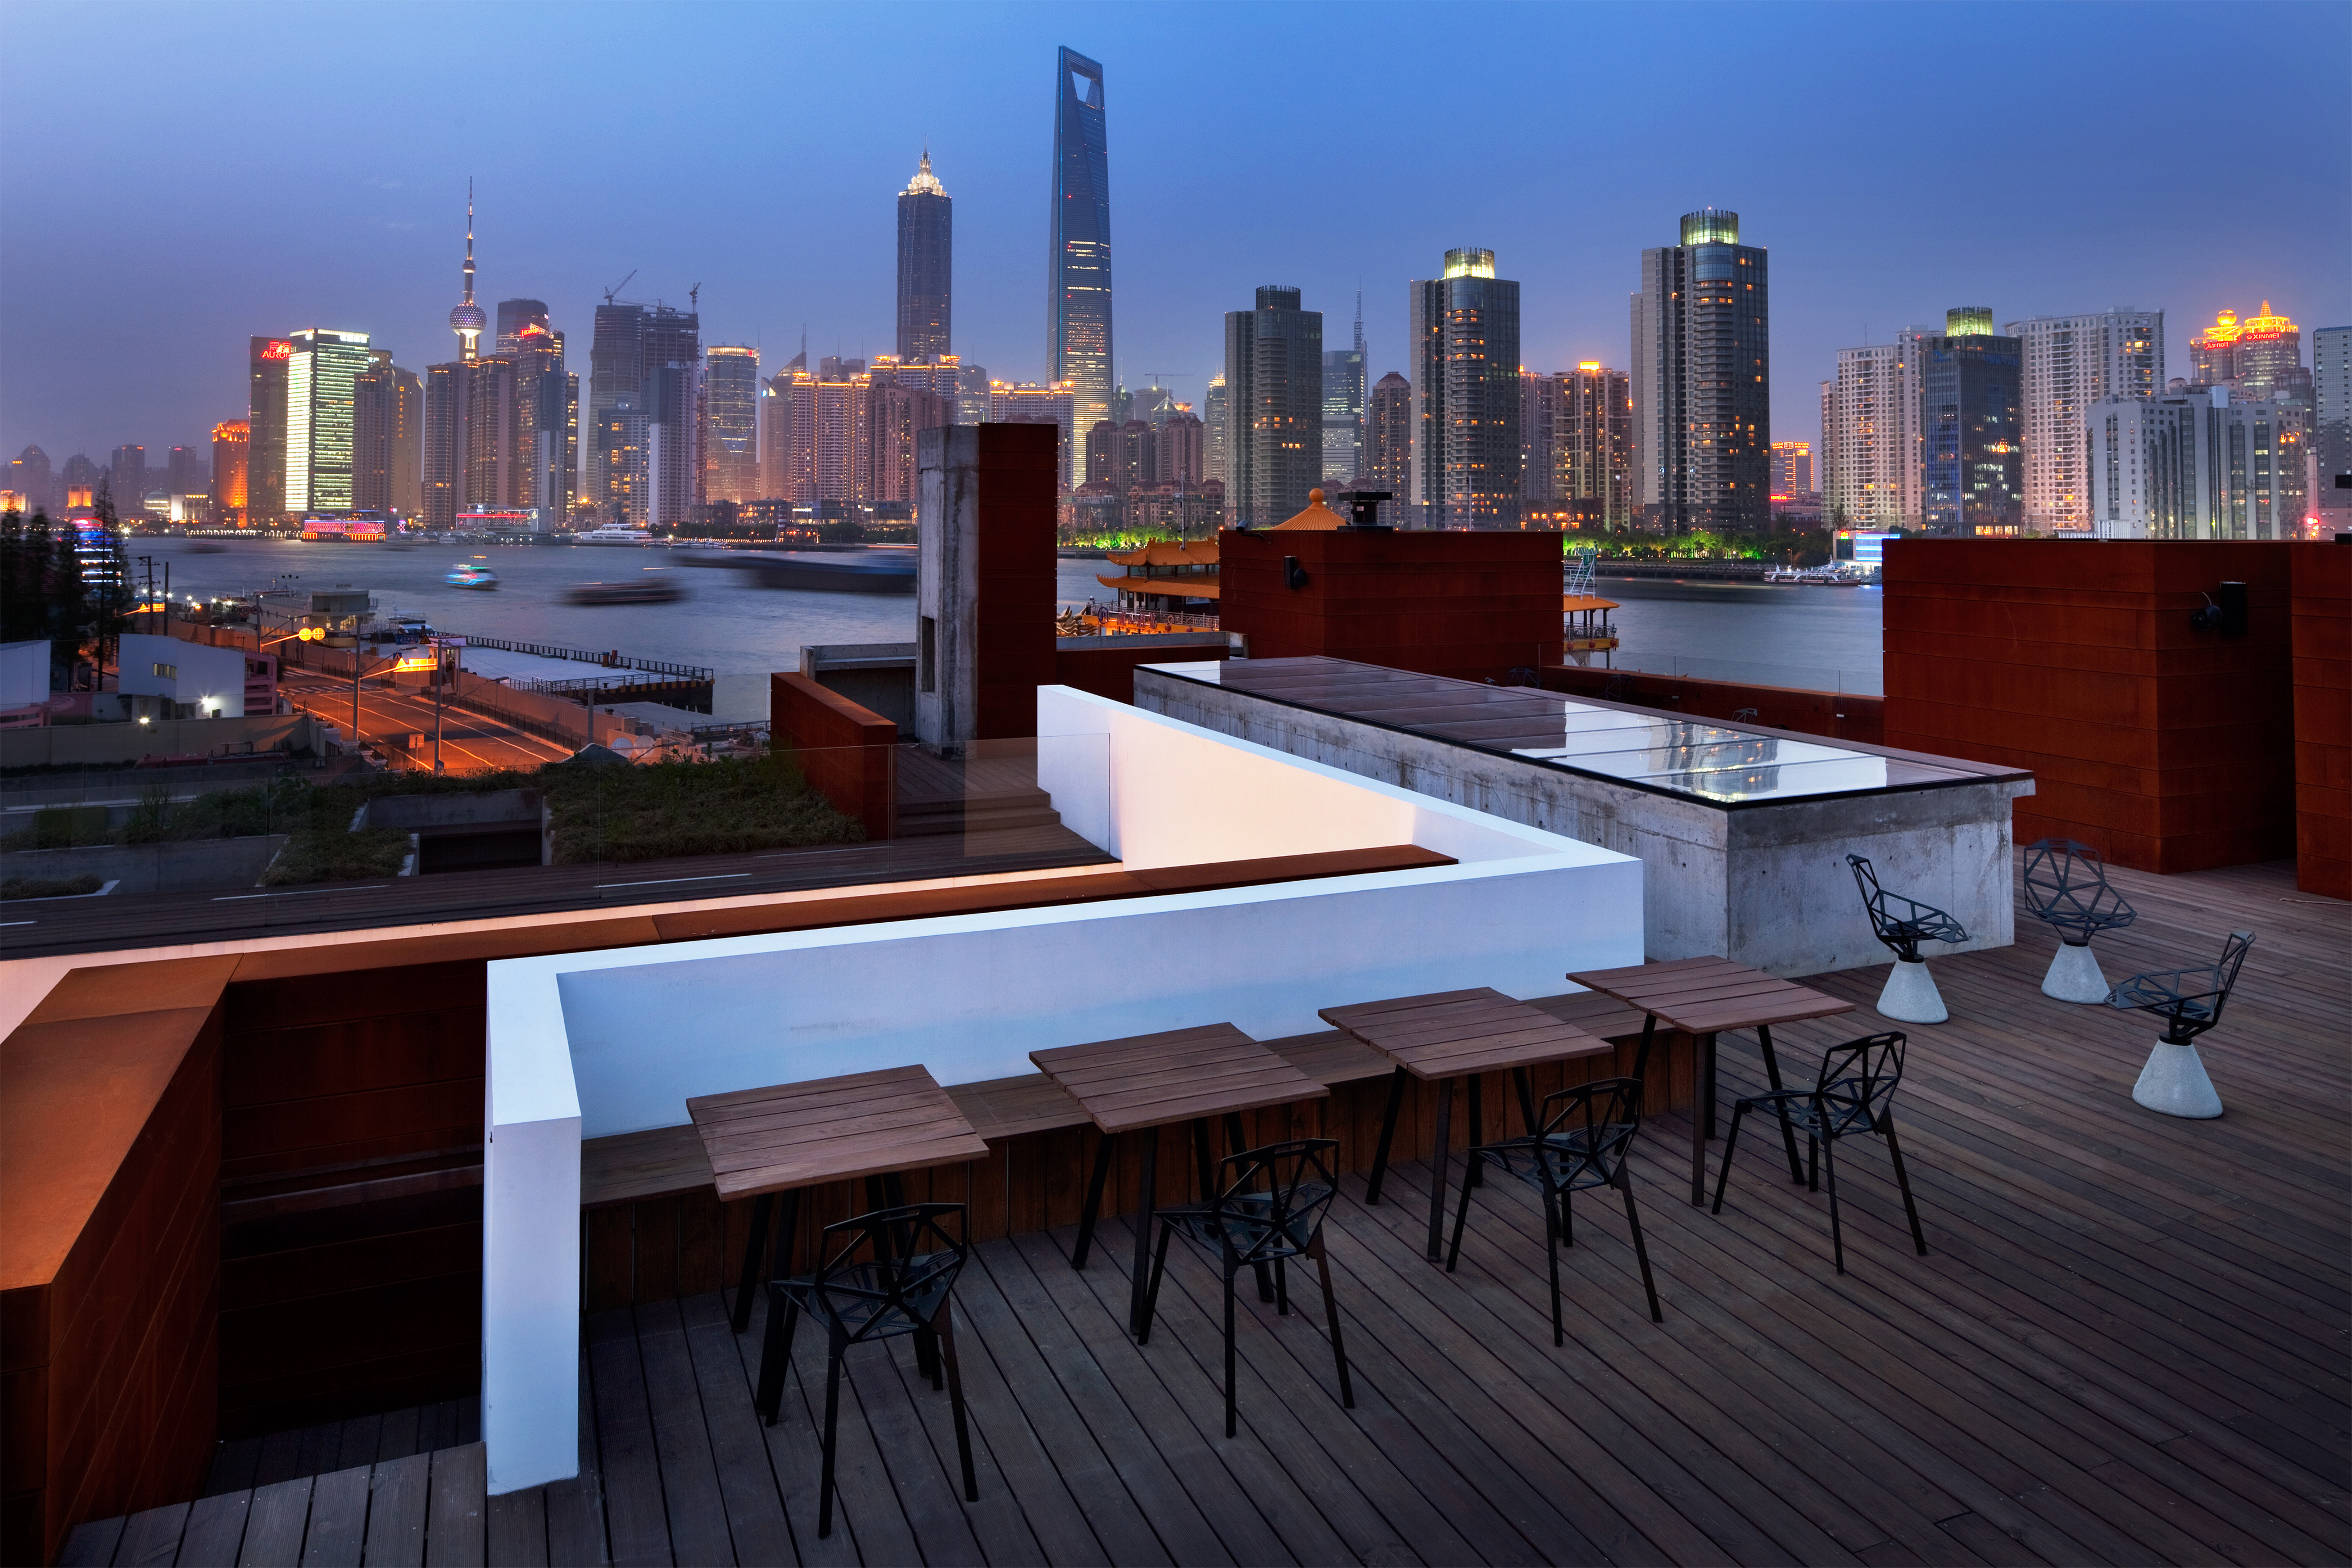 Photo of tables on a deck overlooking a city skyline